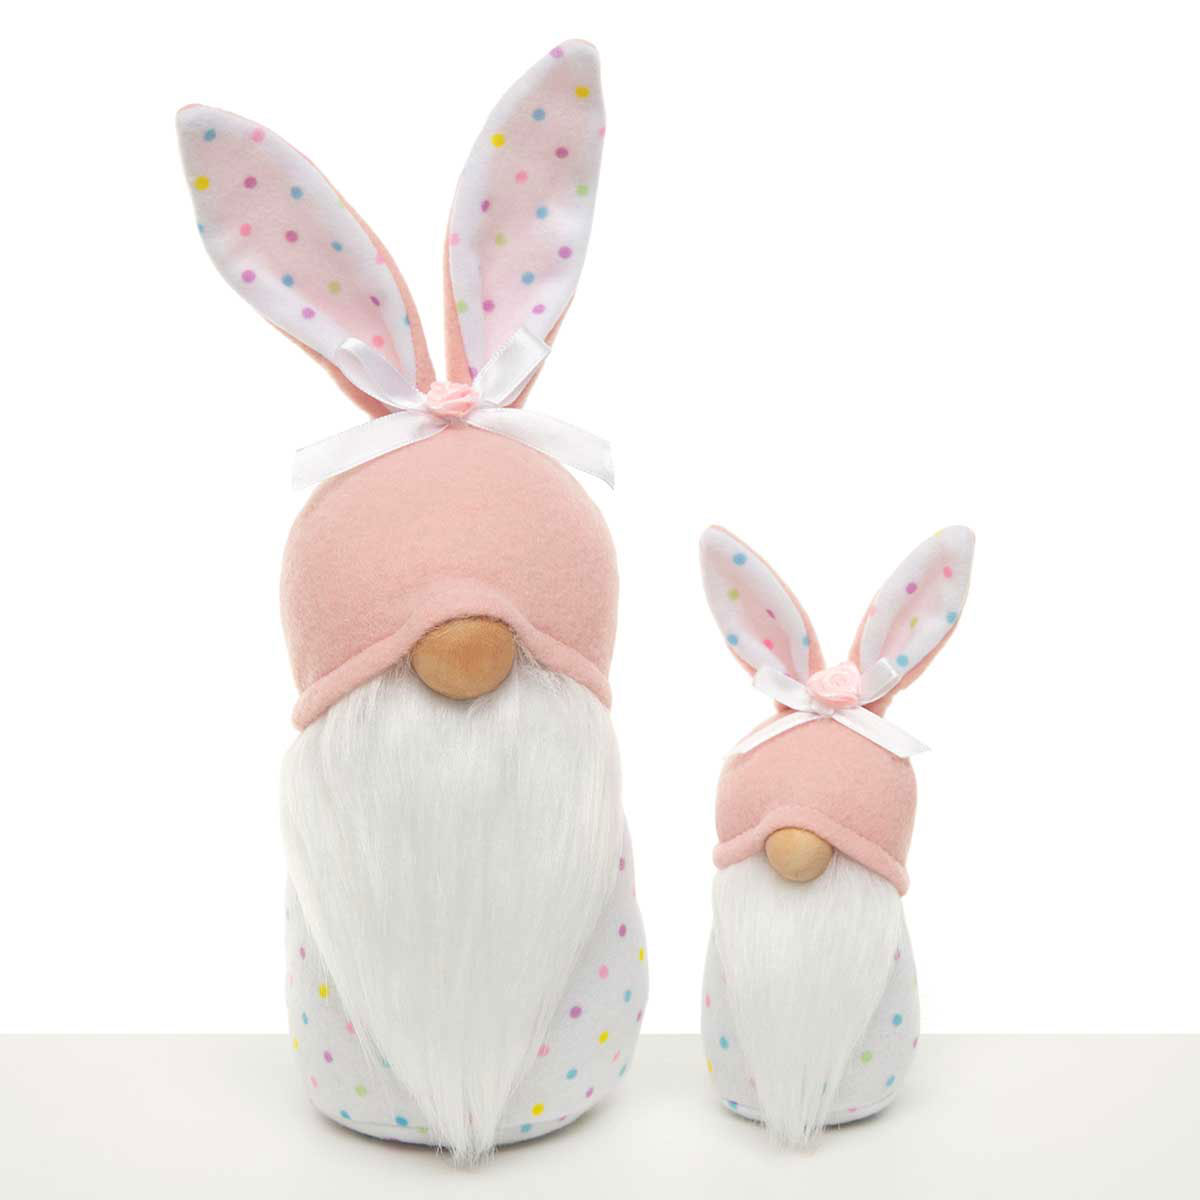 b70 GNOME PINDOT BUNNY LARGE 3.75IN X 6IN X 11.5IN WHITE/PINK